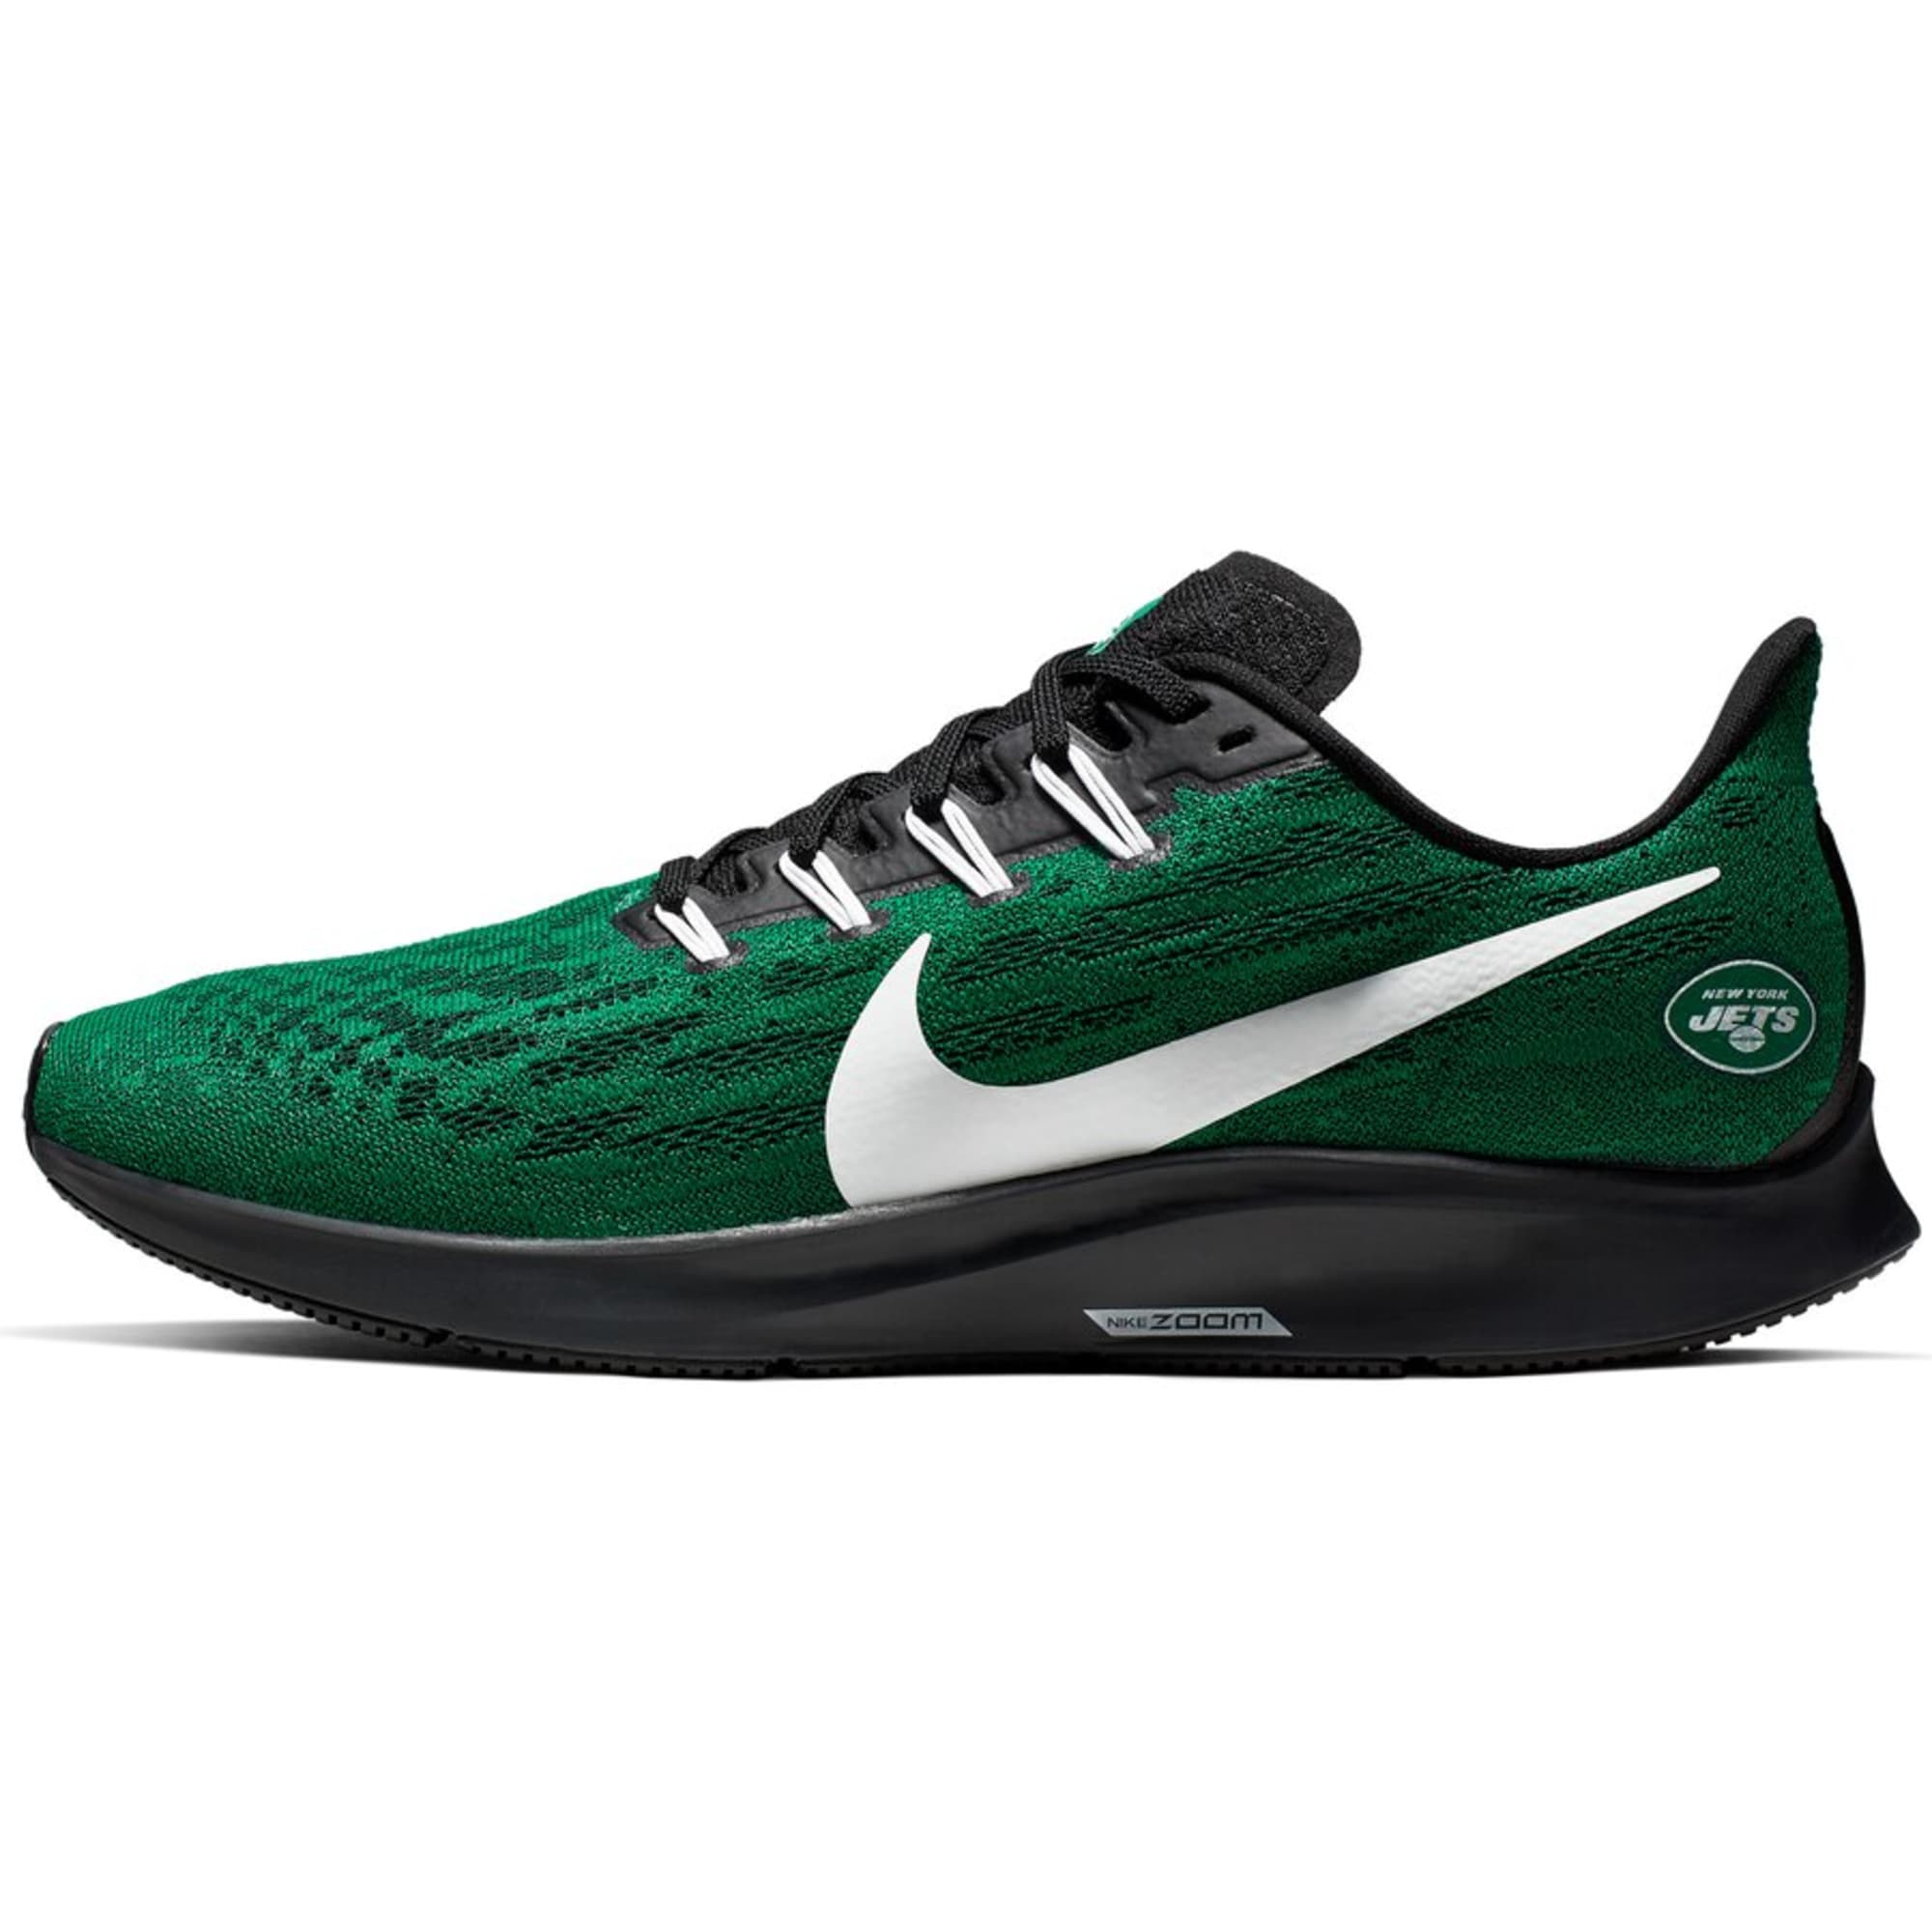 Get your New York Jets Nike Air Zooms now